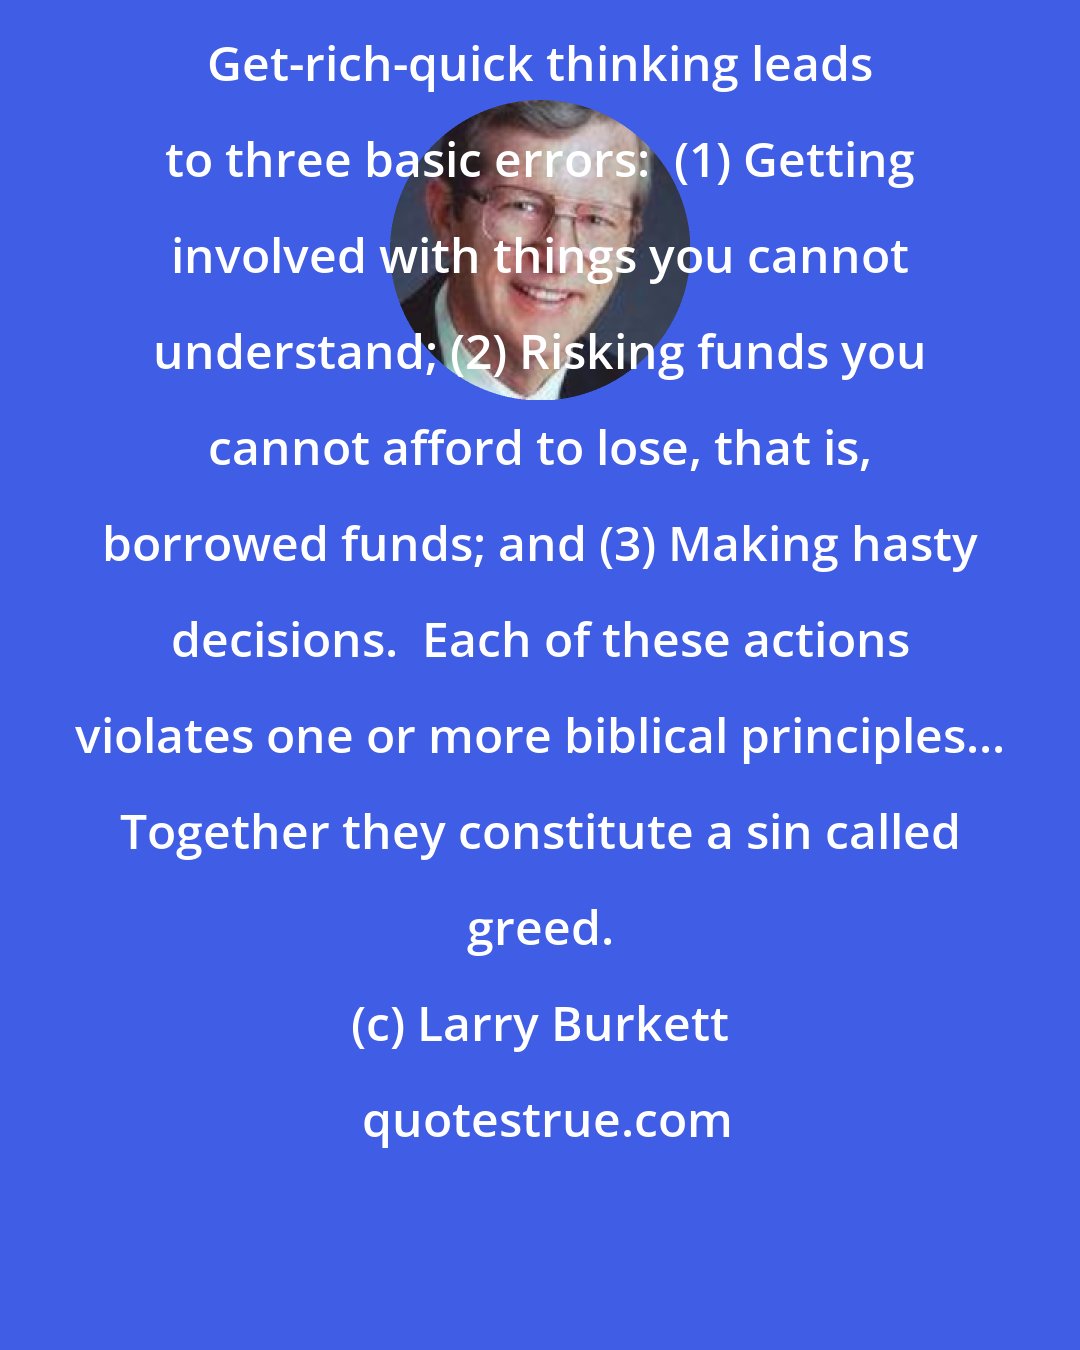 Larry Burkett: Get-rich-quick thinking leads to three basic errors:  (1) Getting involved with things you cannot understand; (2) Risking funds you cannot afford to lose, that is, borrowed funds; and (3) Making hasty decisions.  Each of these actions violates one or more biblical principles... Together they constitute a sin called greed.